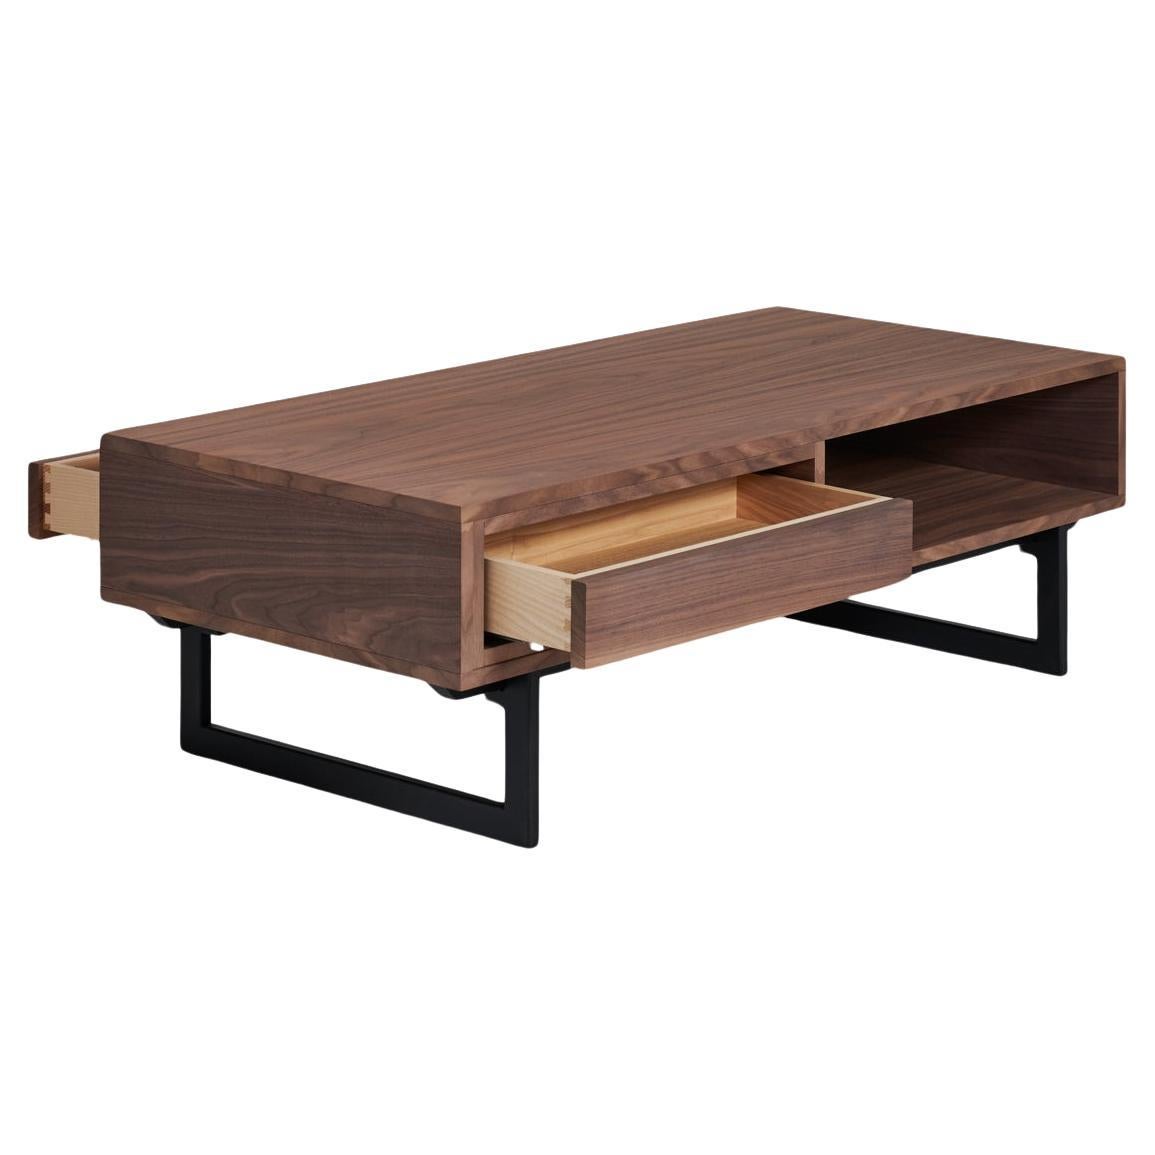 2-drawer coffee table in walnut & black iron feet, design by Christophe Lecomte